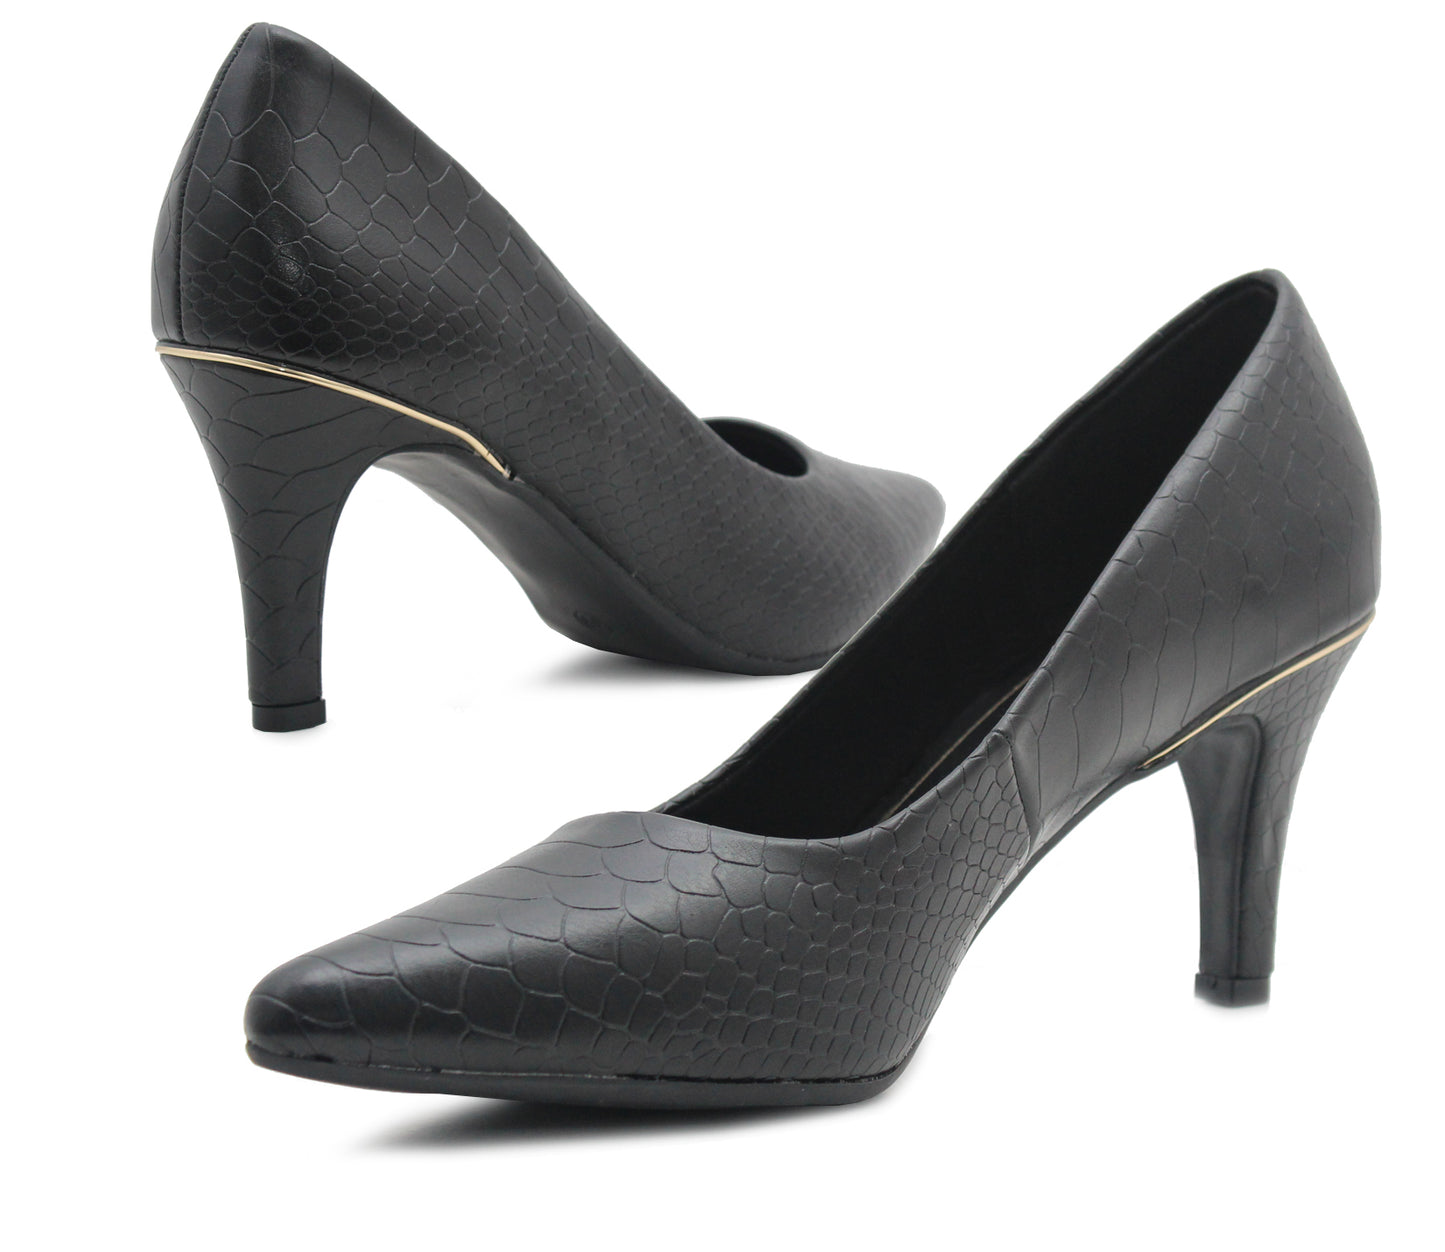 Womens court shoes Croc Print Pointed Toe Stilettoes in Black